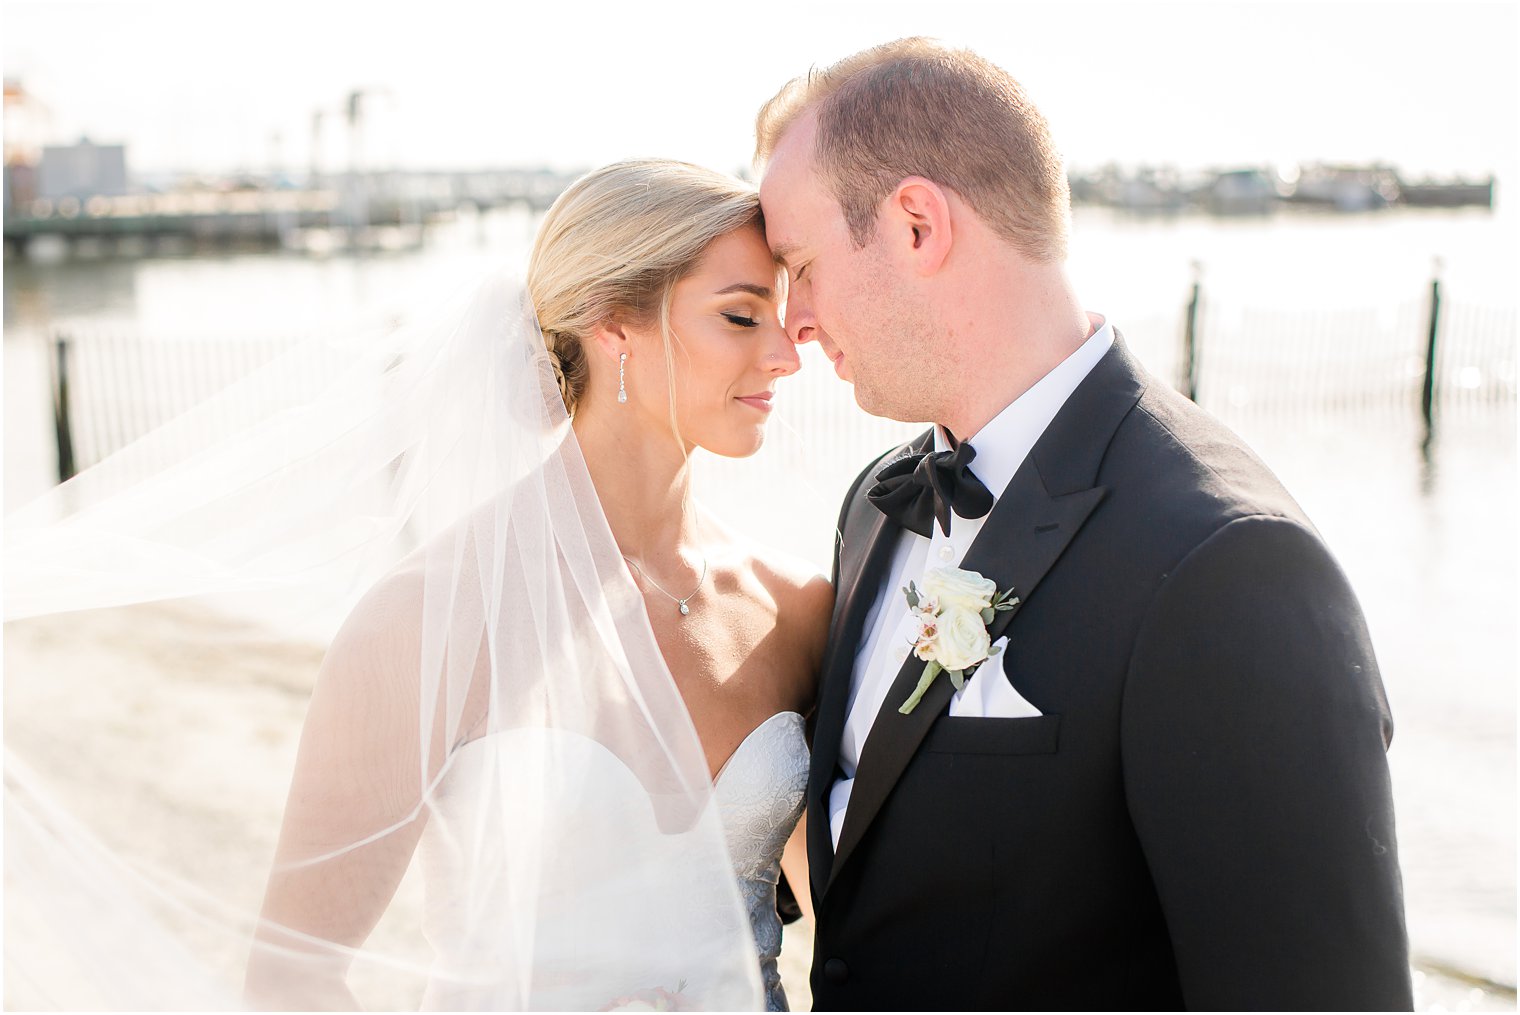 Quiet moment between bride and groom at Brant Beach Yacht Club